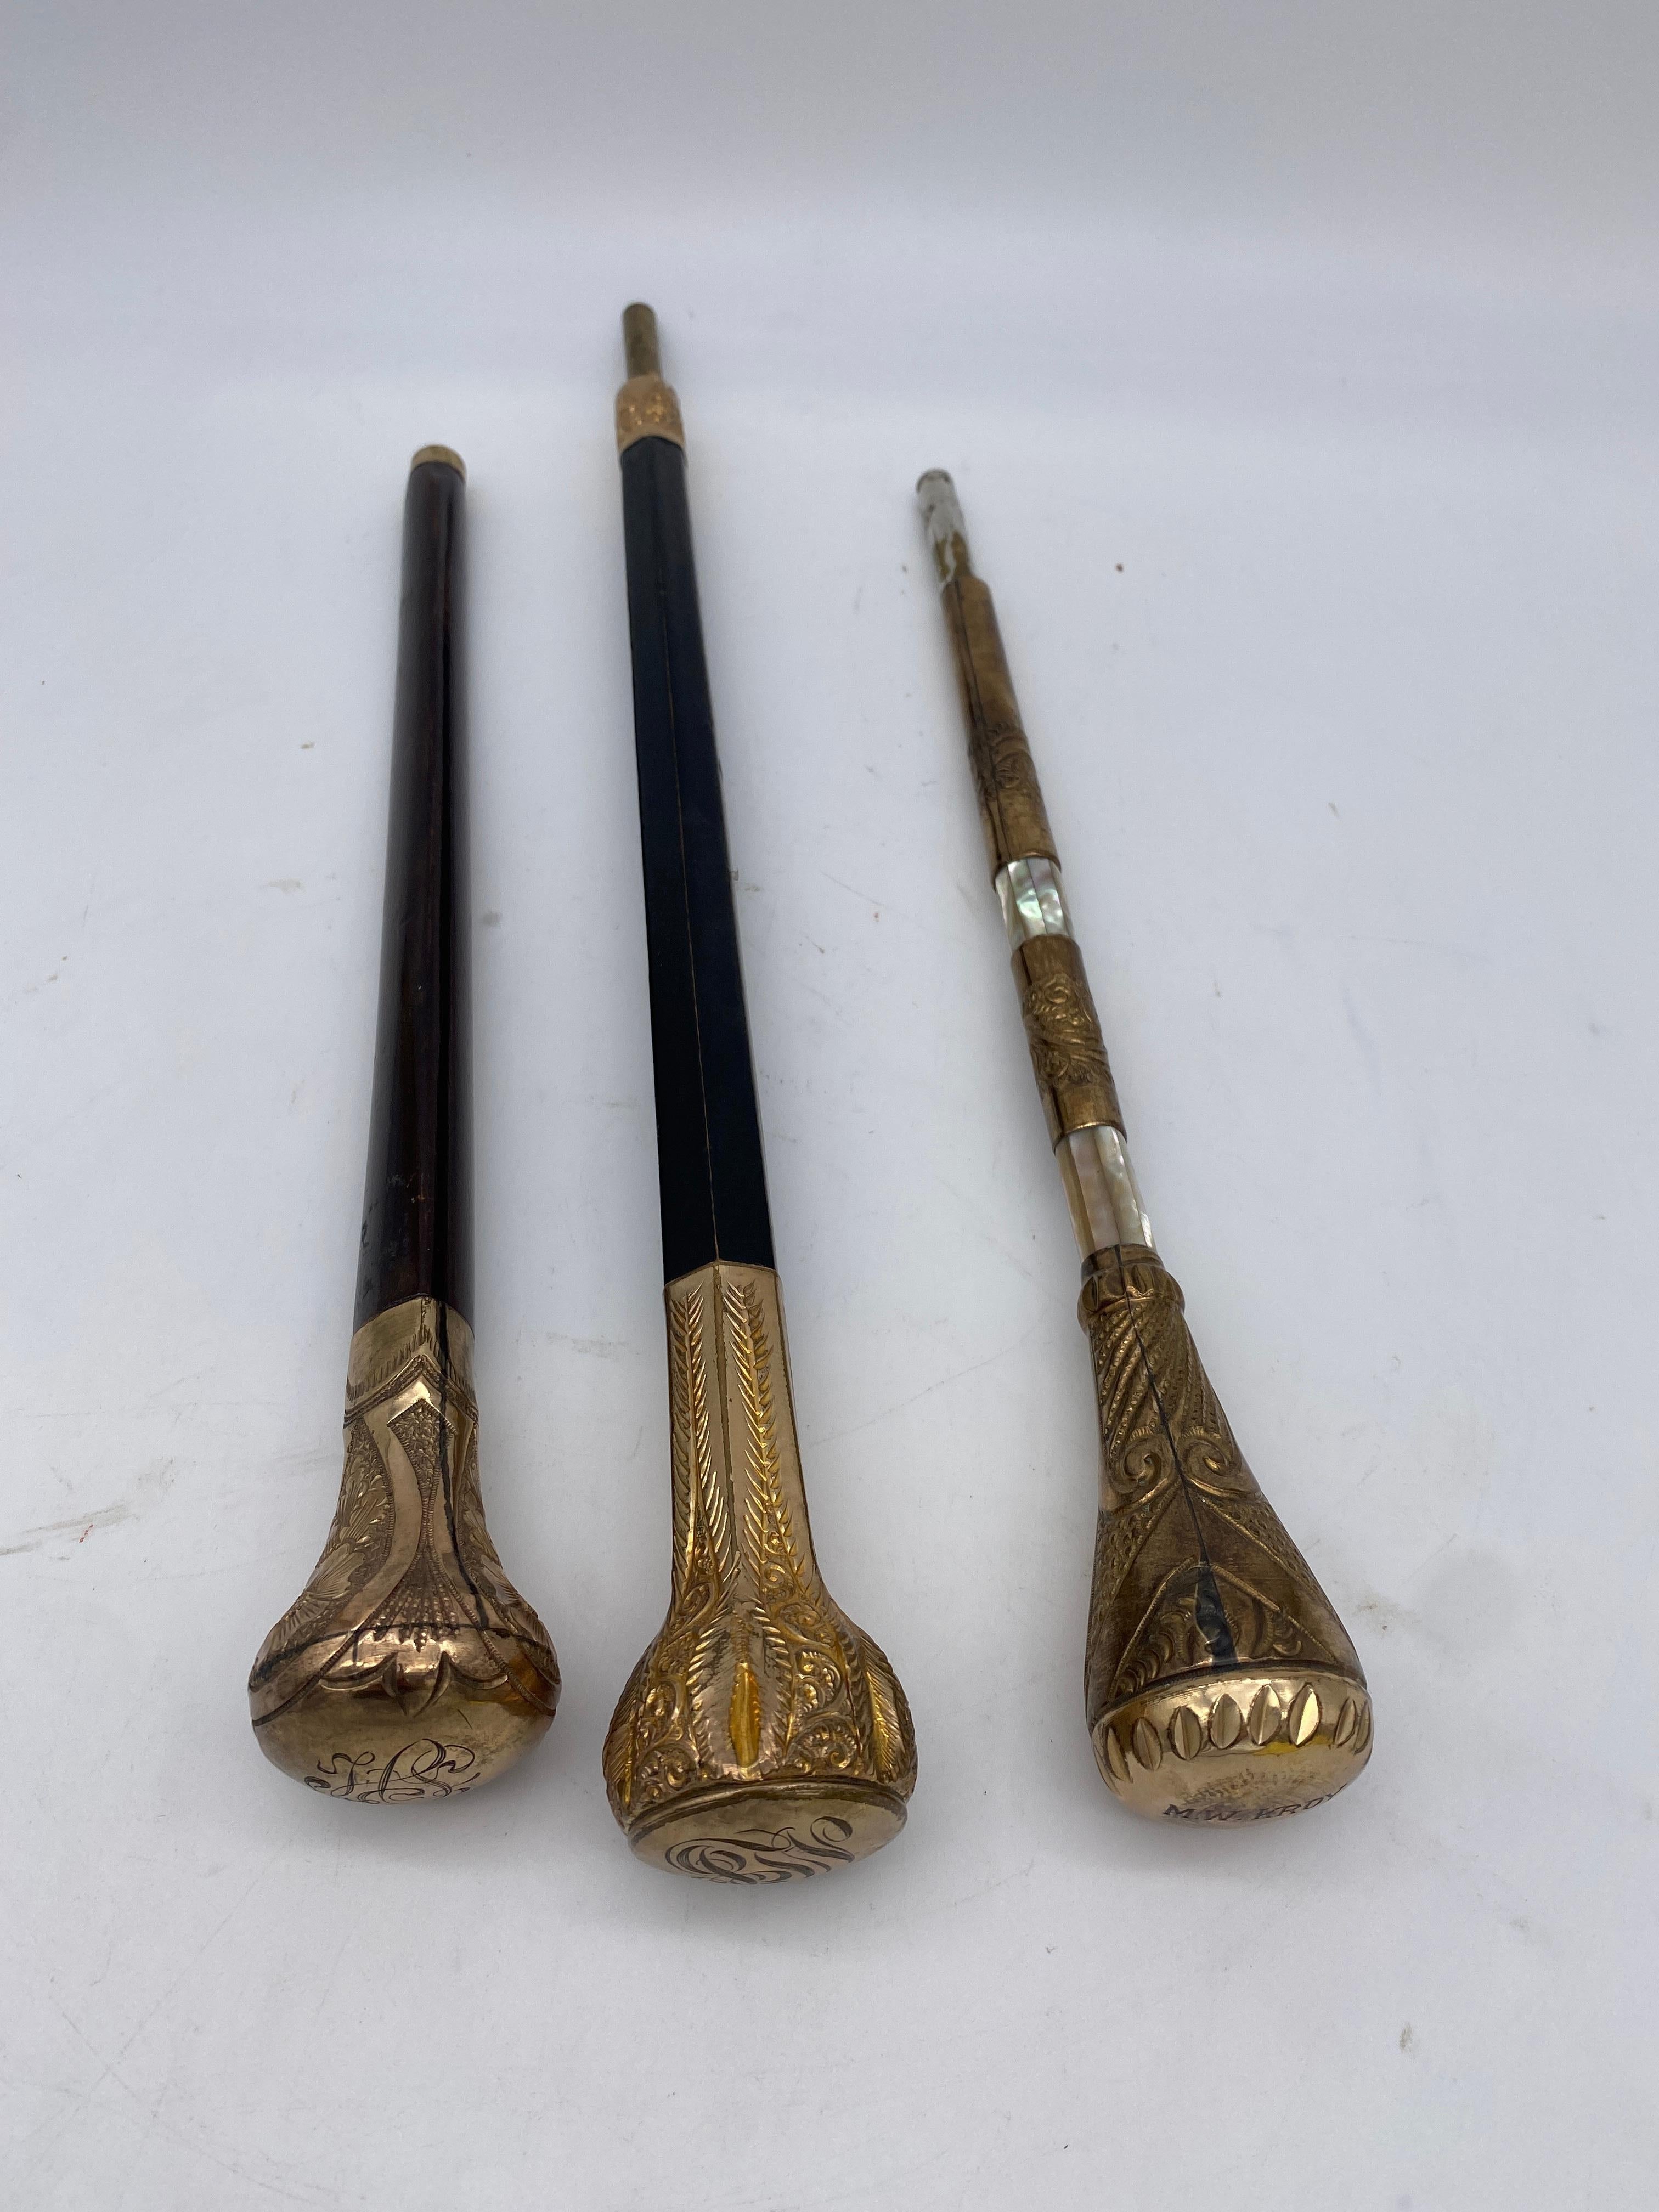 19th century 3 antique Victorian gold topped canes or parasol handles, some monogrammed, one with mother of pearl, see more pictures.